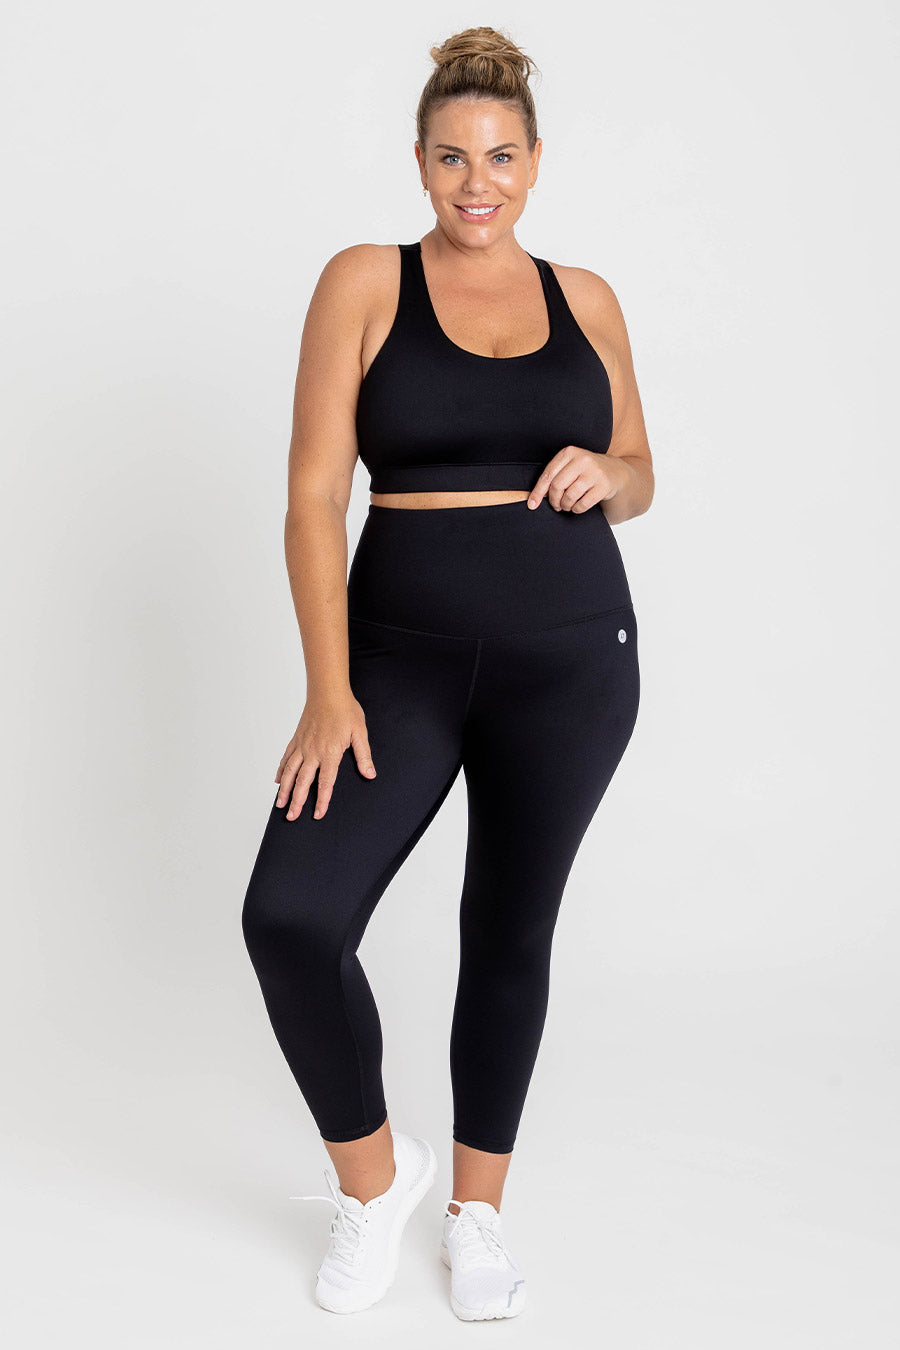 Ultra High Waist 7/8 Length Tight - Black from Active Truth™
